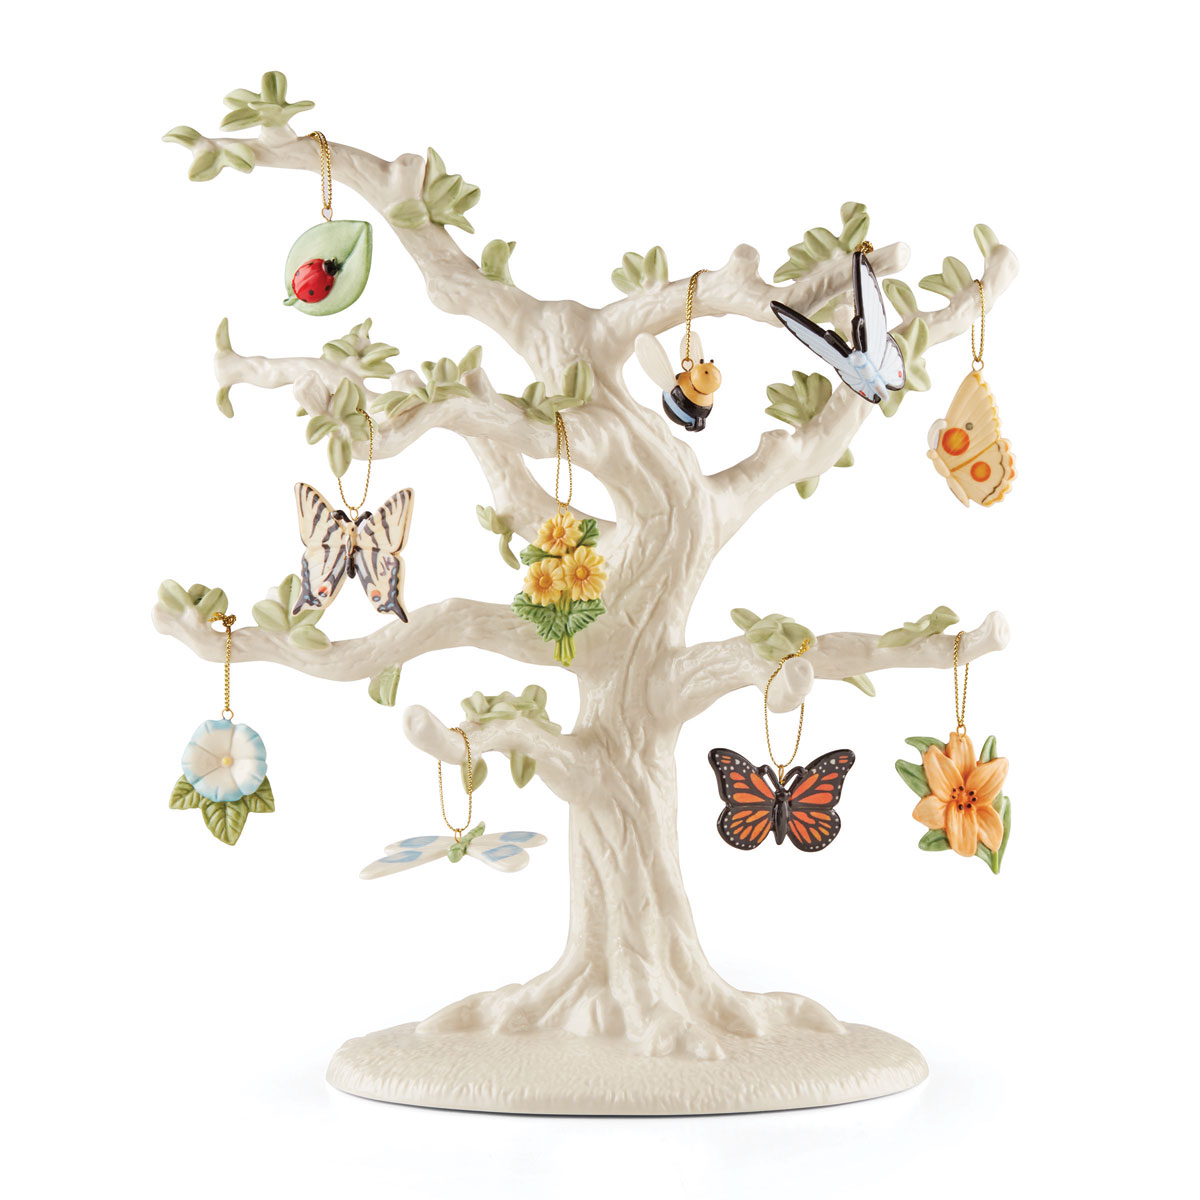 Lenox Ornament Trees Butterfly Meadow 10 Piece Ornament and Tree Set